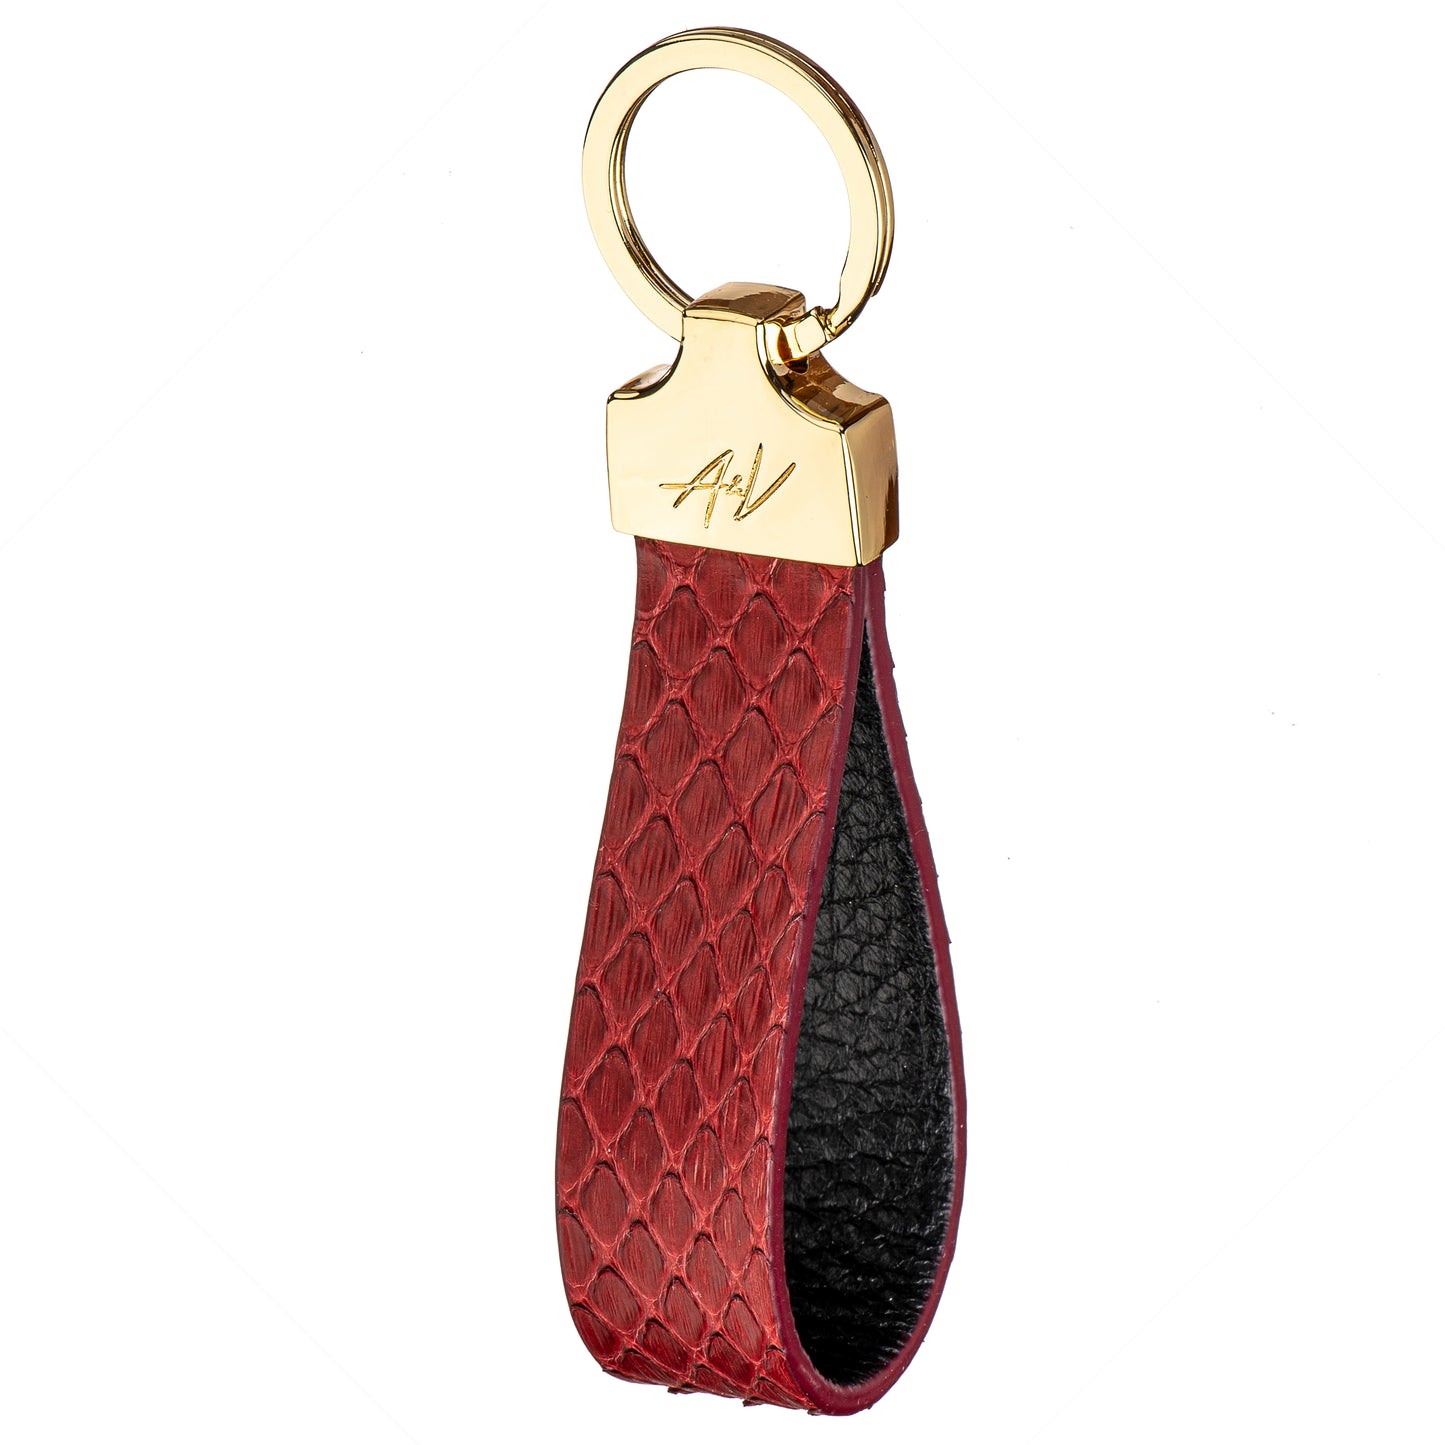 KEYCHAIN STONE MOROCCAN RED